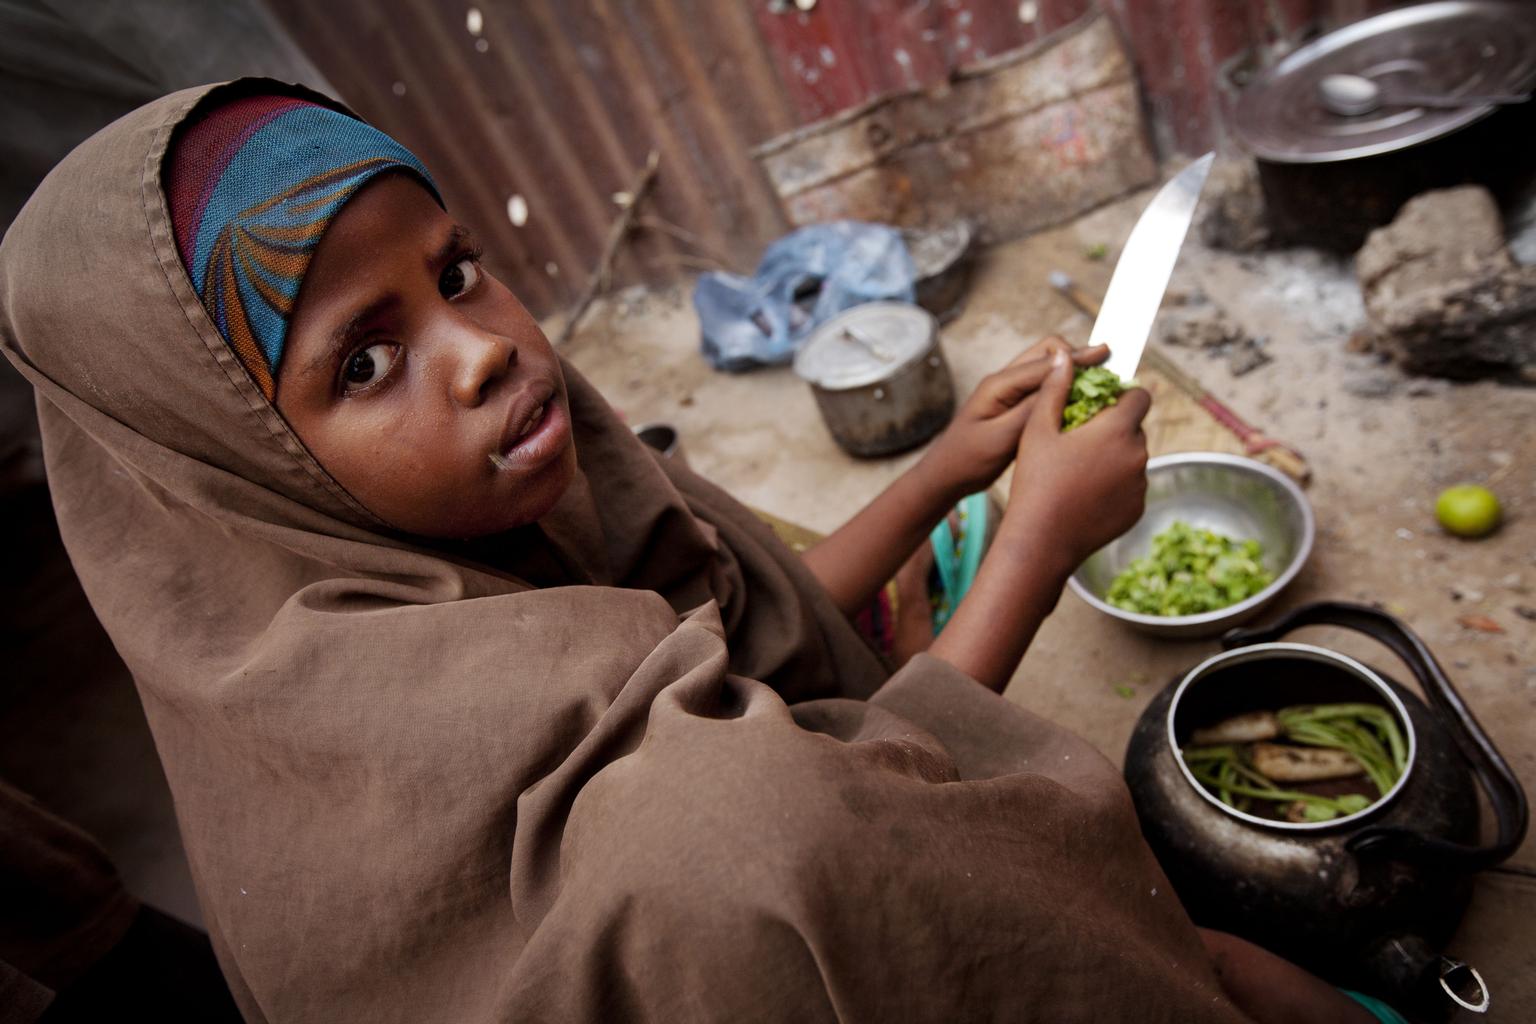 A girl helps prepare her familys evening meal, outside their makeshift home, in the Majo camp for displaced people, in Mogadishu, the capital. UNICEF, in partnership with Somali Community Concern, is supporting two schools, collectively serving over 800 children, in the camp. In July 2012, Somalia marked one year since famine was declared in parts of the country, amid the Horn of Africas worst drought in 60 years. While affected areas have since emerged from famine, conditions remain critical, and the countrys already decades-long conflict continues with no end in sight. A third of Somalis are currently in need of emergency assistance, and over one fifth of under-five children are suffering from malnutrition. By mid-June, over 992,000 Somalis had sought refuge in neighbouring countries, many of which are undergoing their own food crises, while 1.3 million had been internally displaced. Of these, over 127,000 have settled in war-torn Mogadishu, the capital. In the past year, UNICEF has treated over 455,000 acutely malnourished children under age 5; helped nearly 2.7 million people gain access to clean water and over 1.2 million to healthcare facilities; provided over 380,000 children with access to UNICEF-supported schools and over 37,000 to child-friendly spaces, where services include psychosocial assistance; and sent more than 27,000 tonnes of supplies to affected areas. UNICEF requires US$162.2 million for its ongoing work in Somalia throughout 2012, over 60 per cent of which remains unfunded.